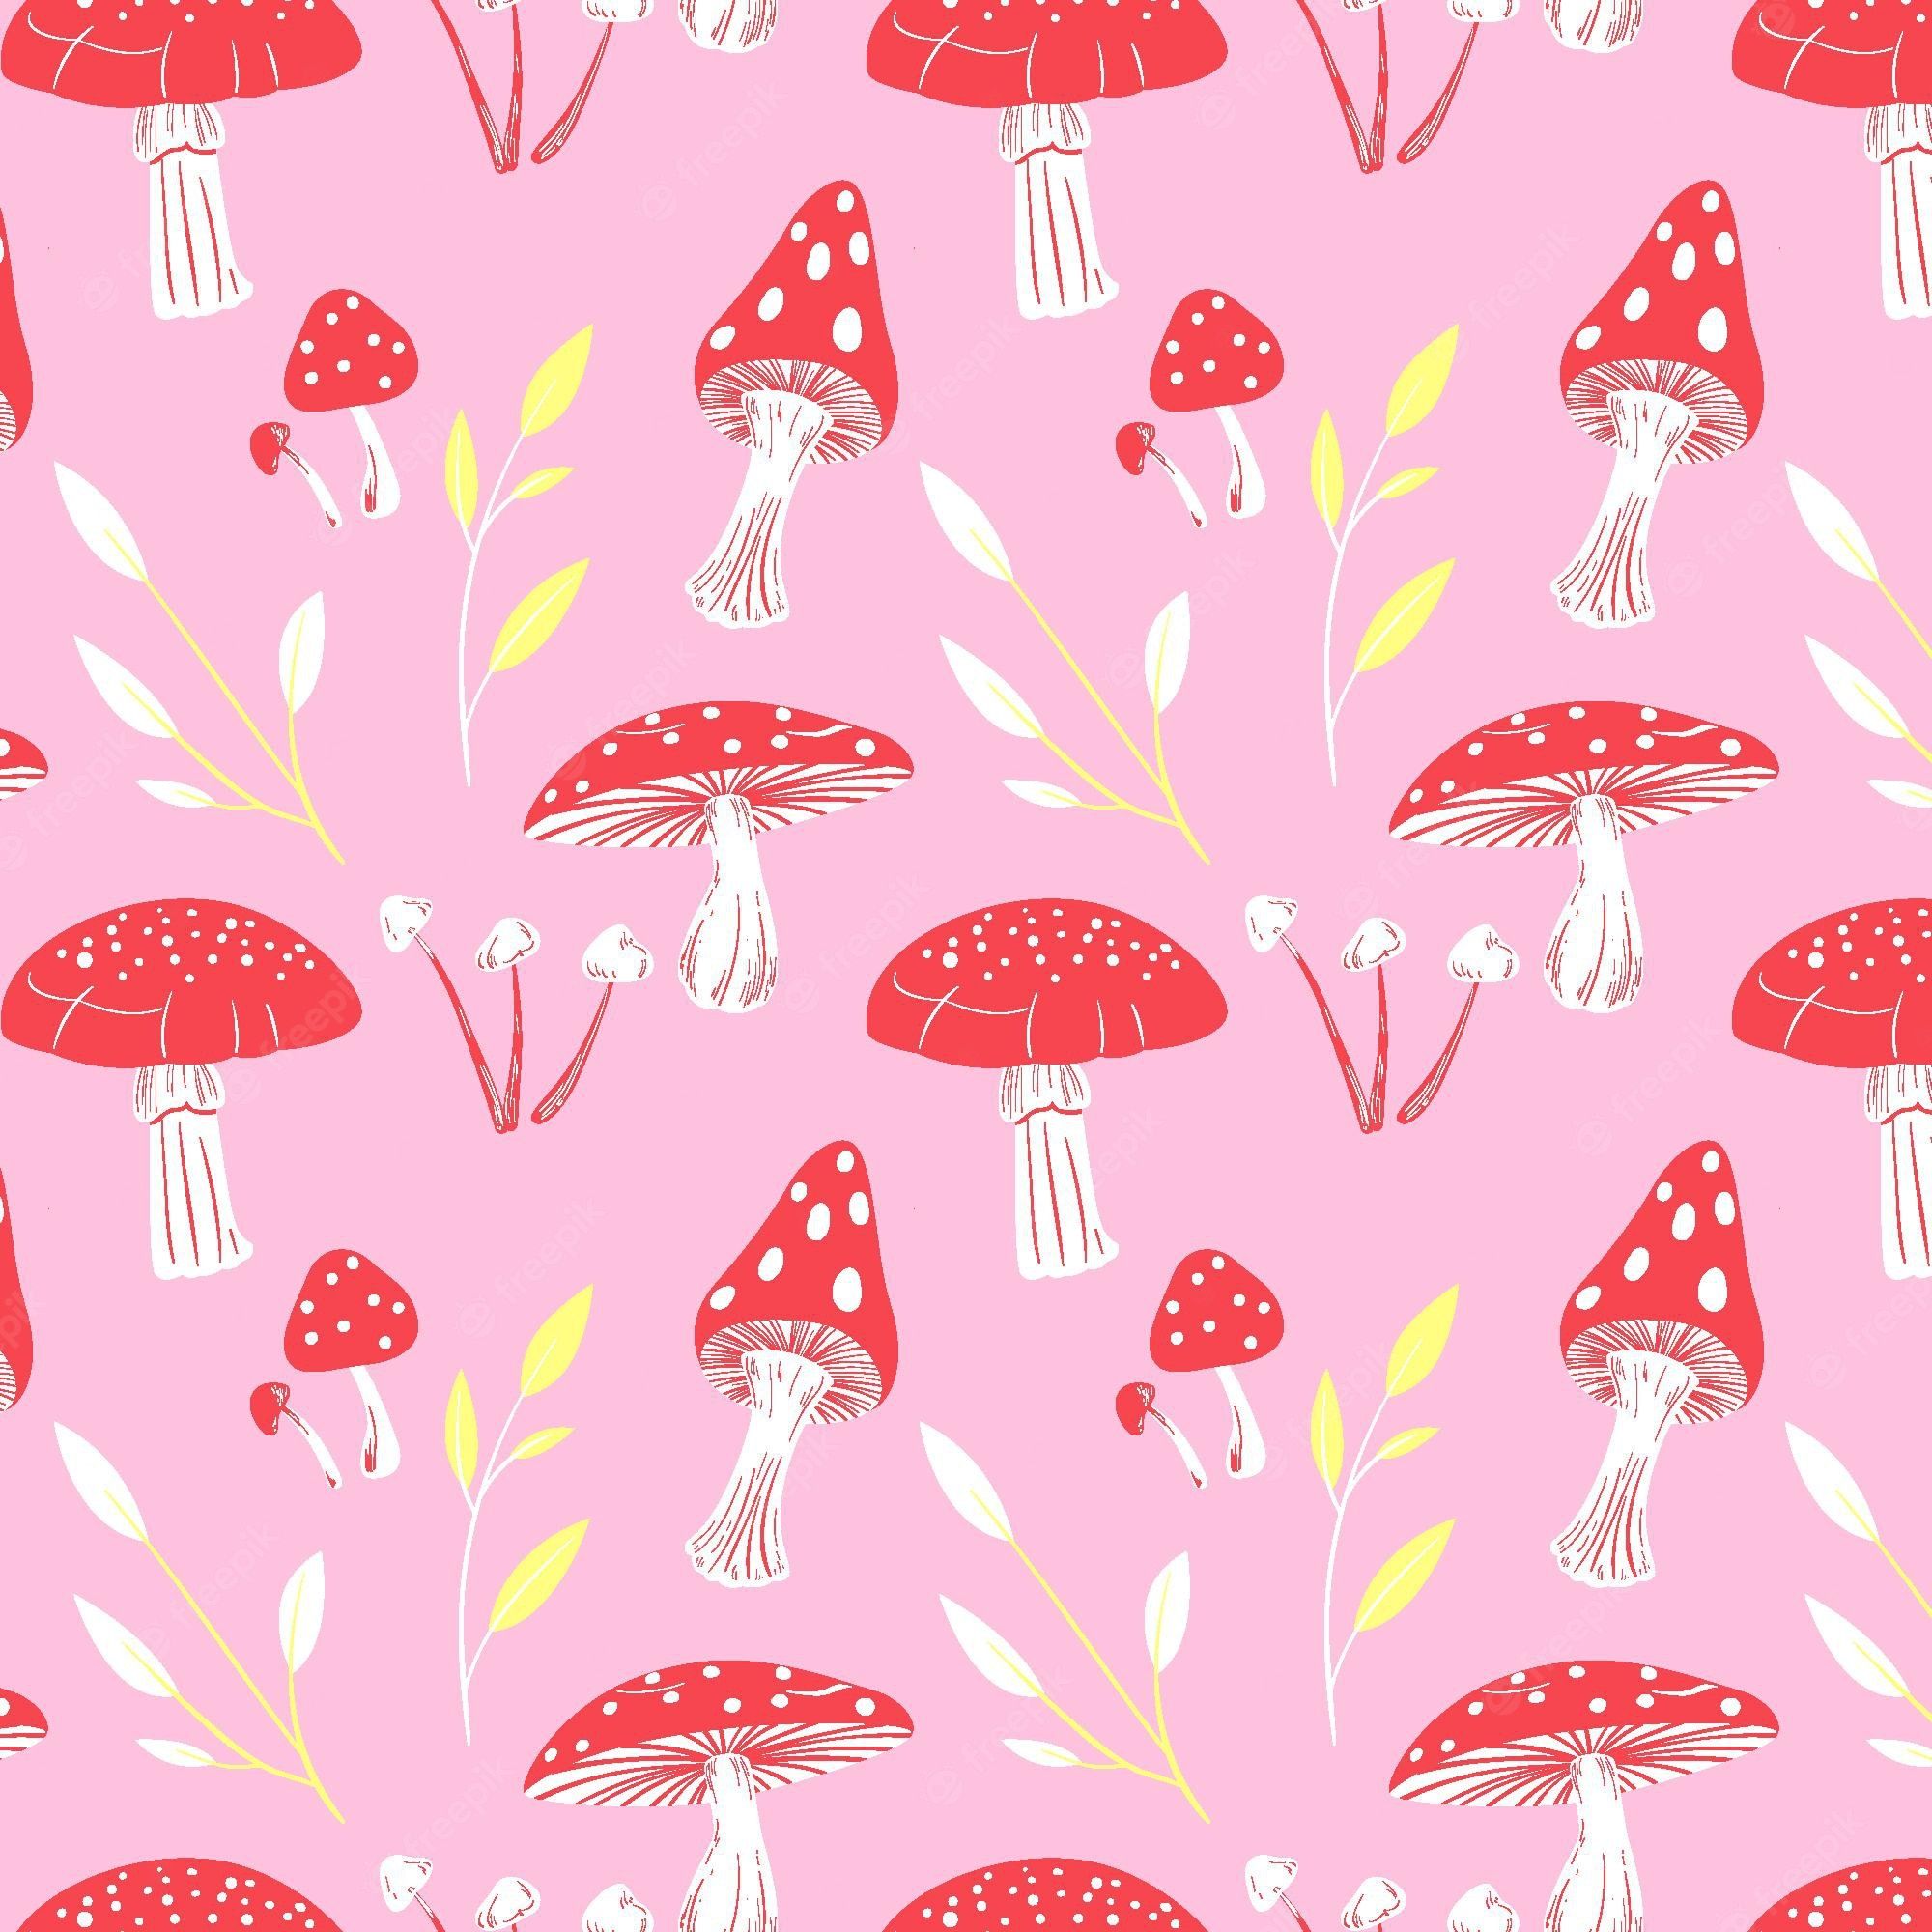 A repeat pattern of red mushrooms on a pink background - Mushroom